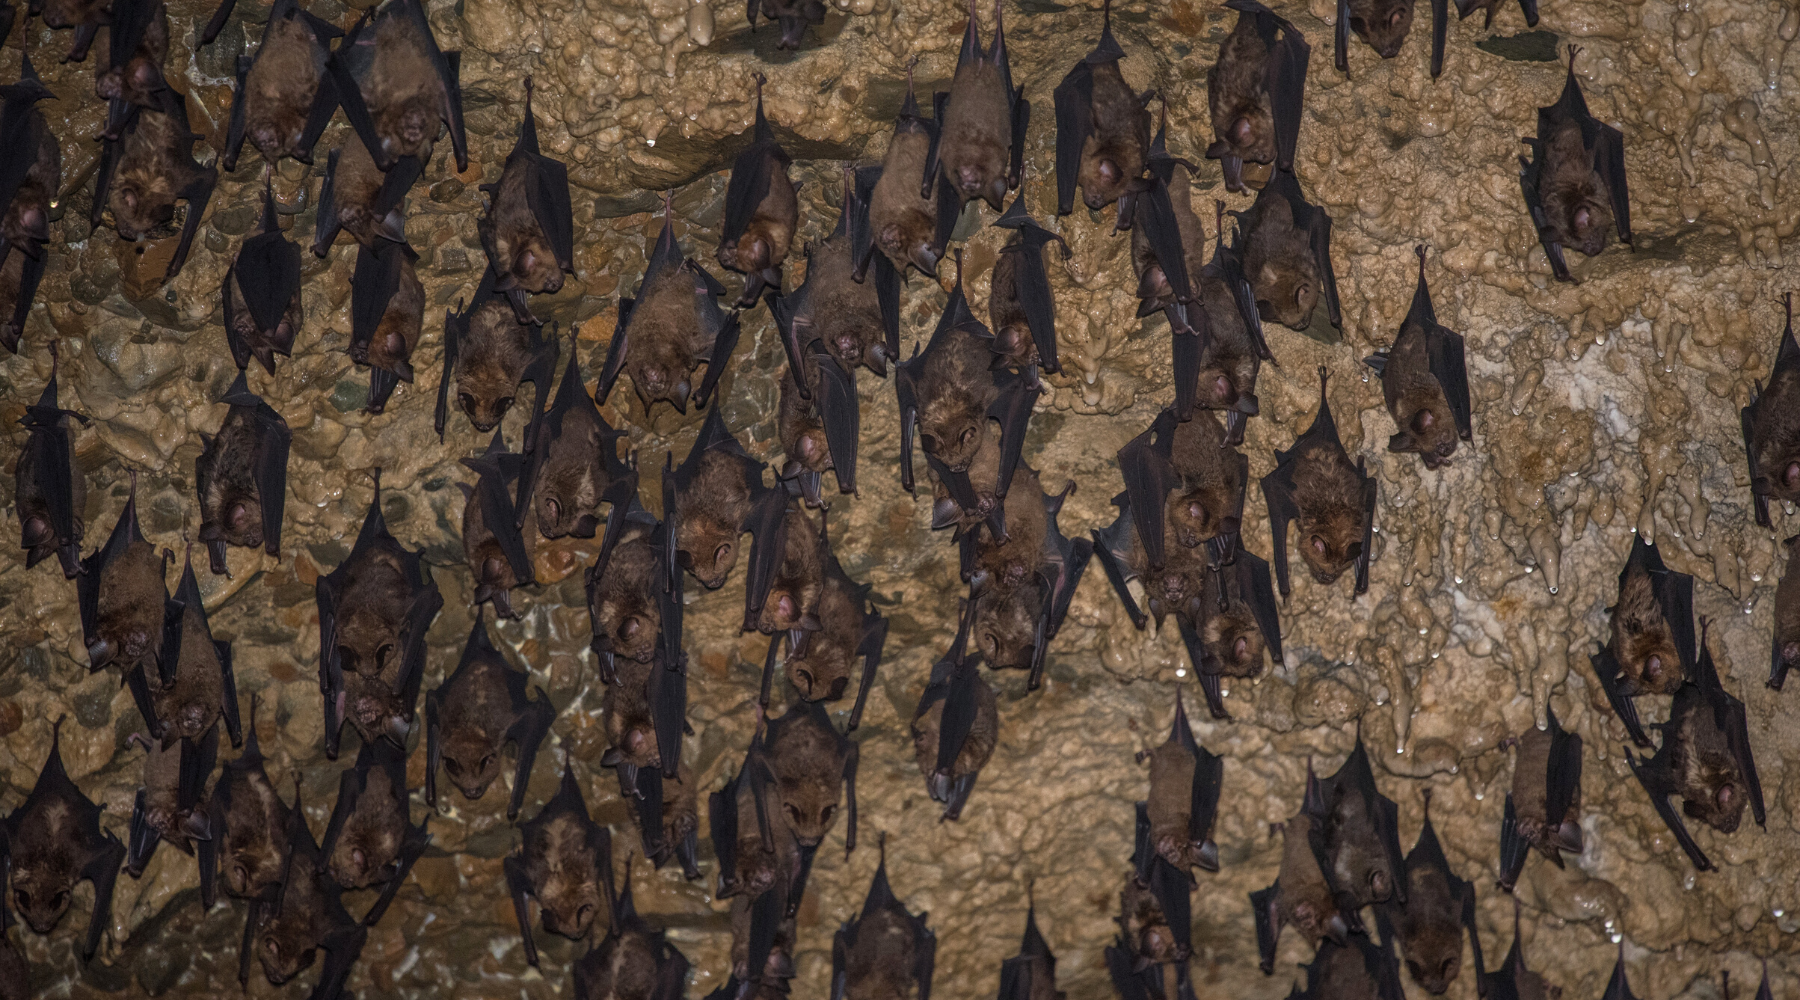 several bats hanging in a dark a cave